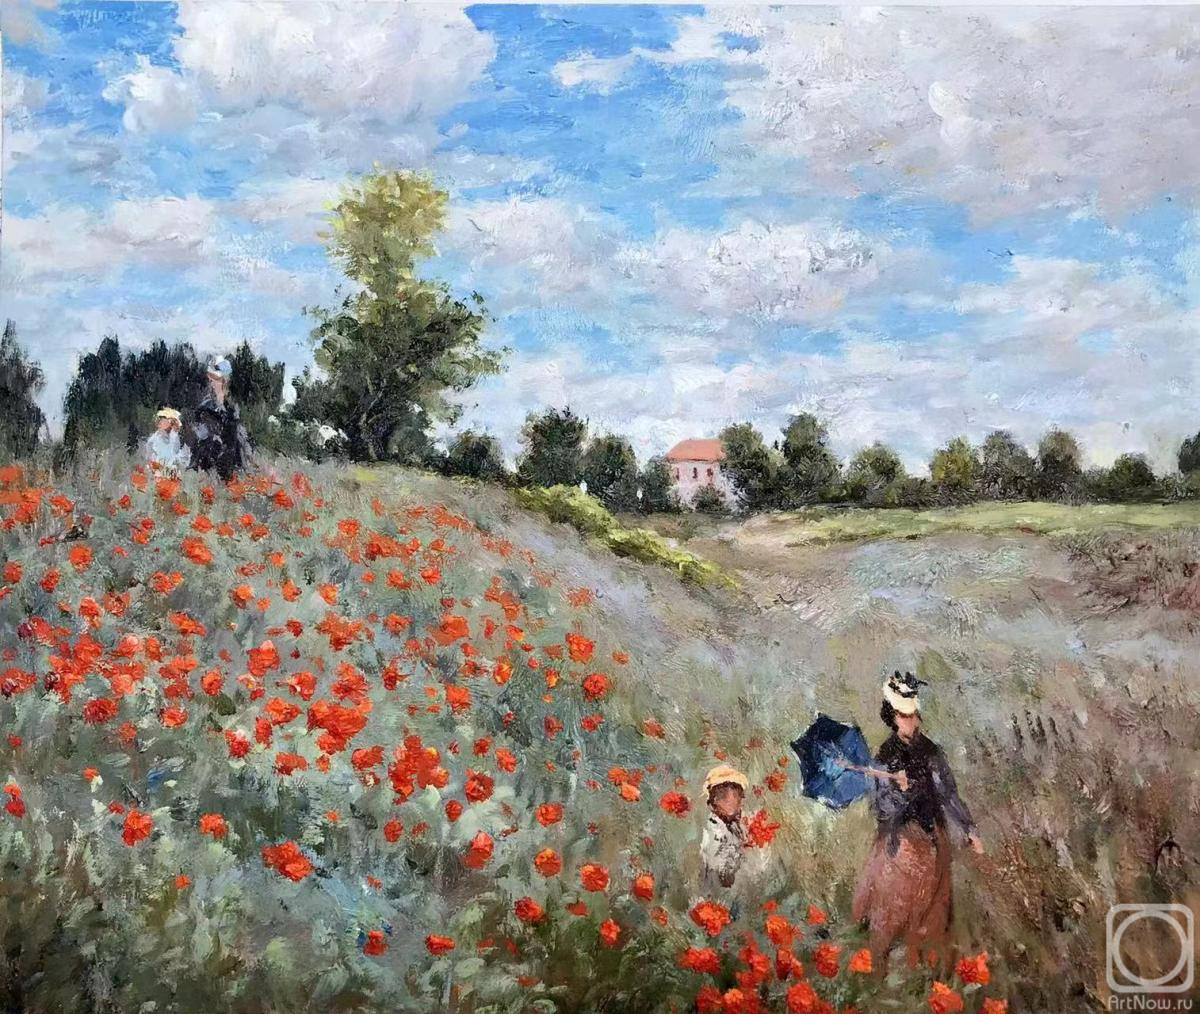 Kamskij Savelij. A copy of the painting by Claude Monet. Field of poppies at Argenteuil